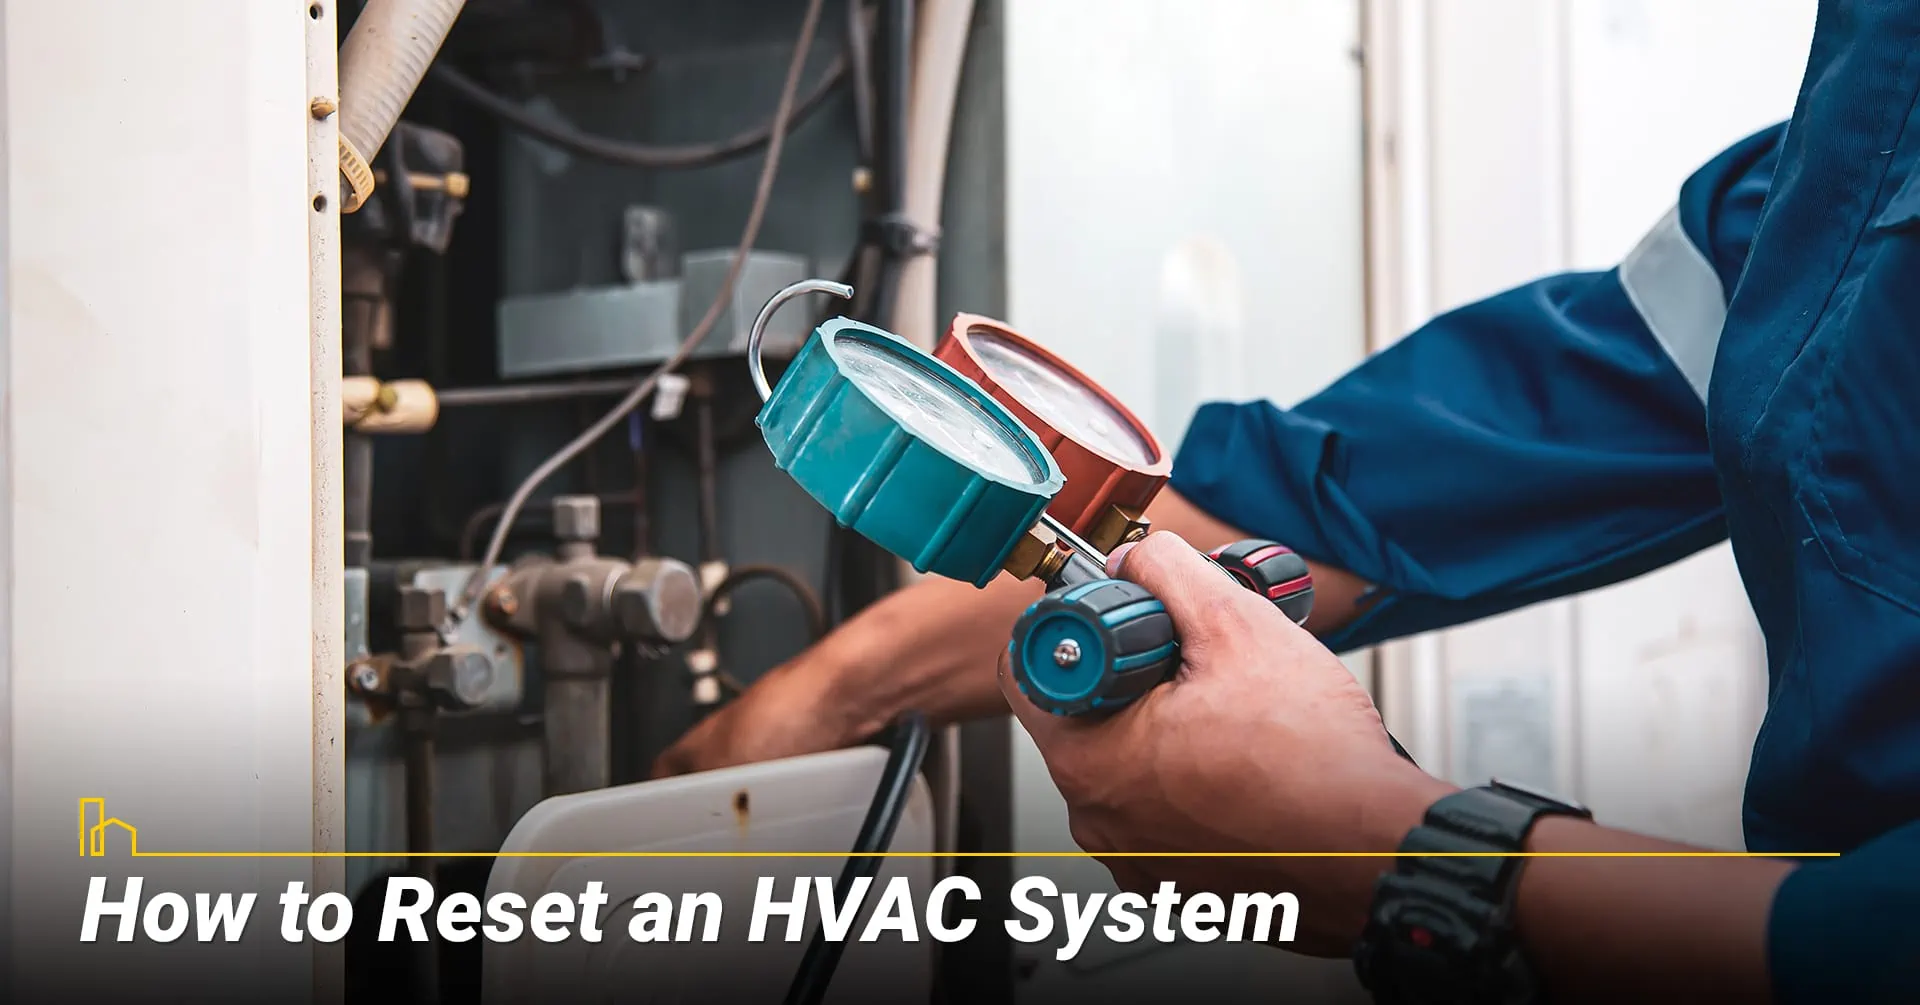 How to Reset an HVAC System